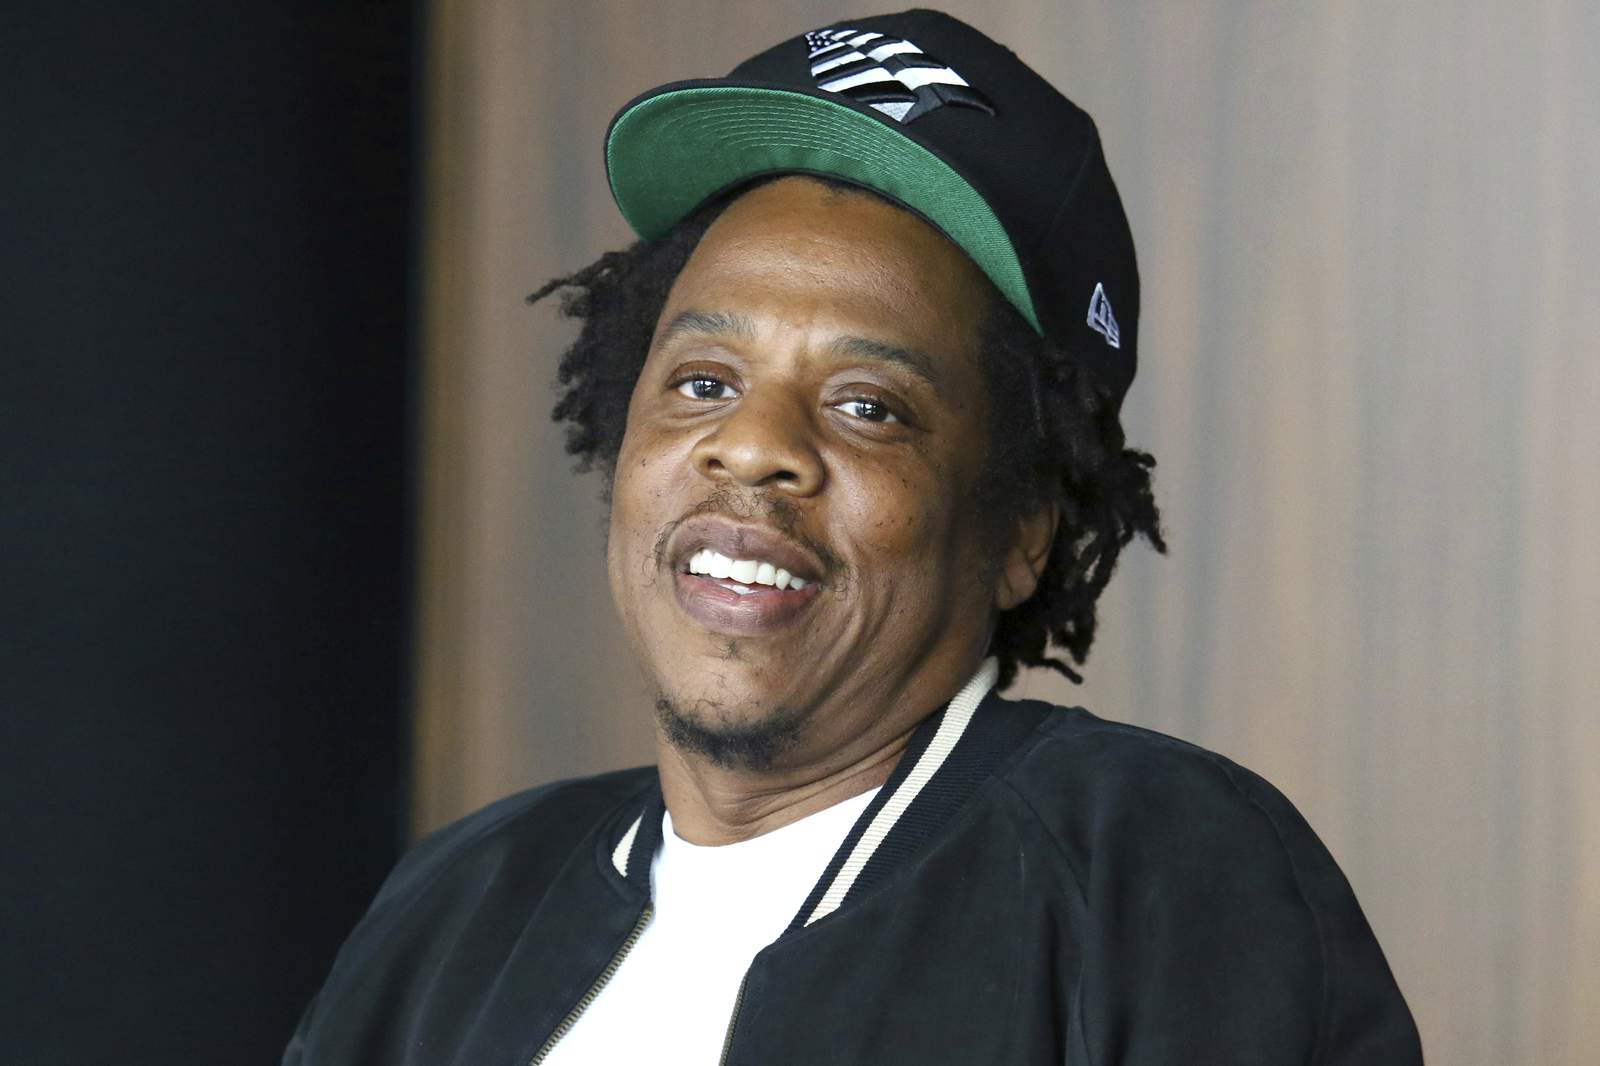 Square, Inc. to buy majority of Tidal and put Jay-Z on board